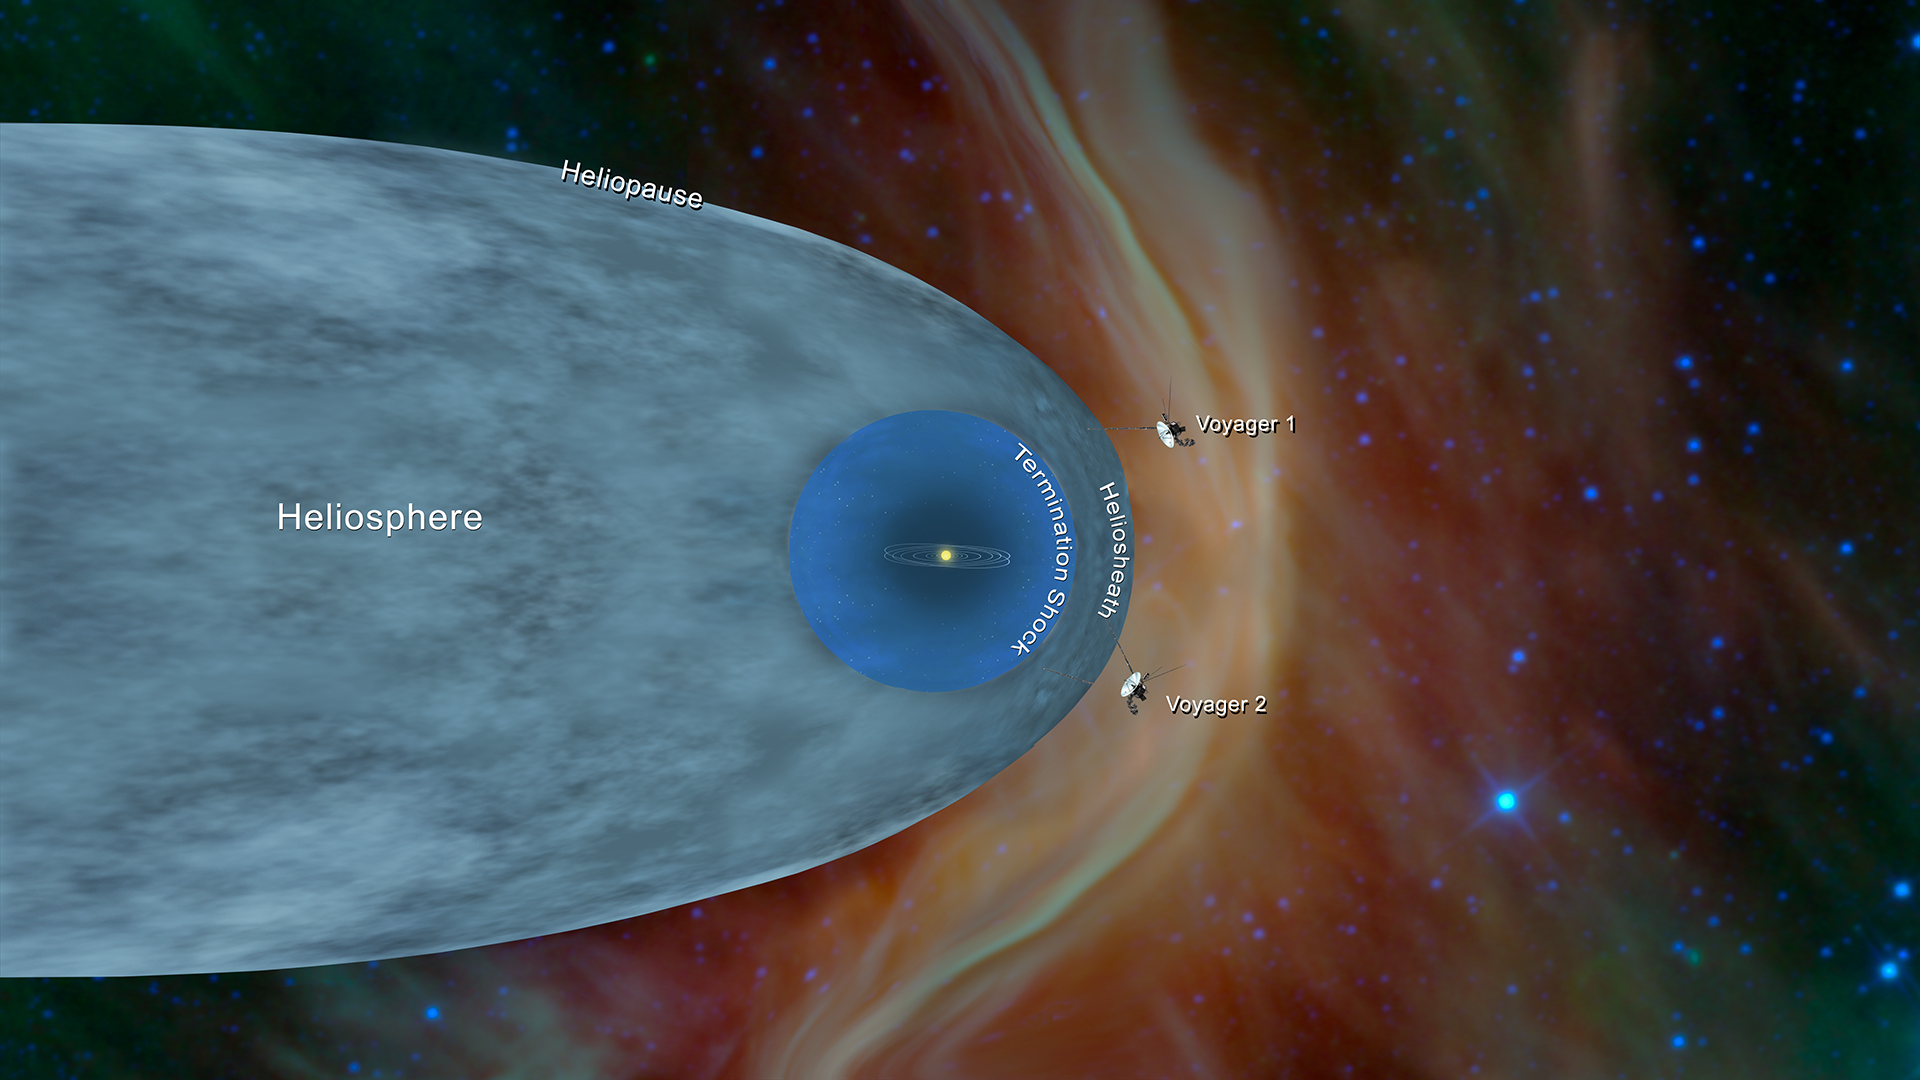 This graphic shows the position of NASA's Voyager 1 and Voyager 2 probes, outside of the heliosphere, a protective bubble created by the Sun that extends well past the orbit of Pluto.